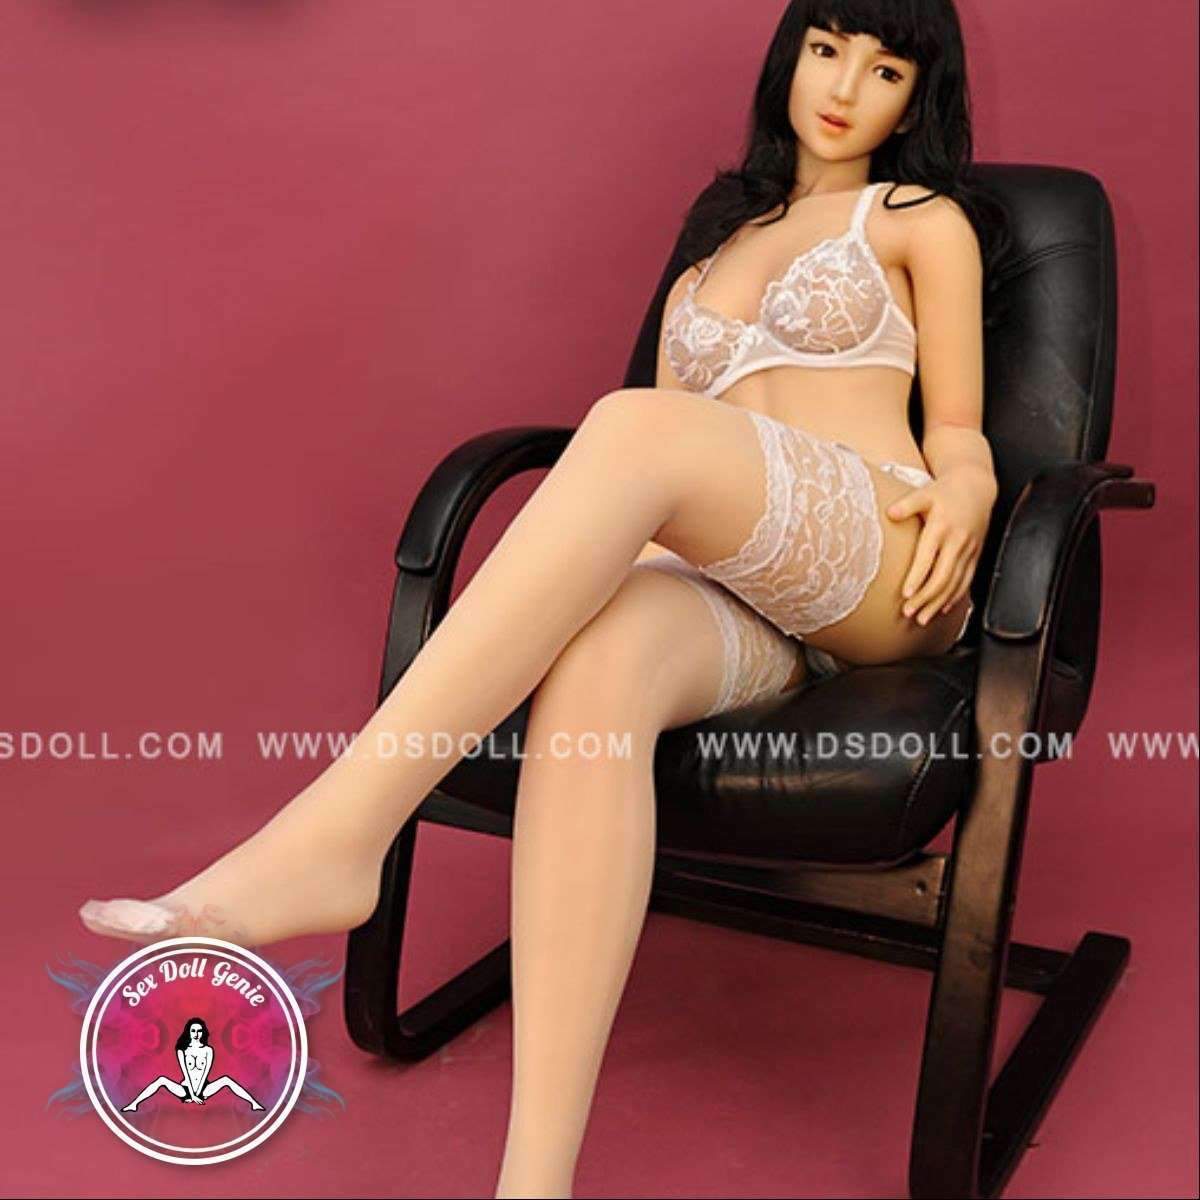 DS Doll - 160cm - Jiaxin Head - Type 1 D Cup Silicone Doll-9